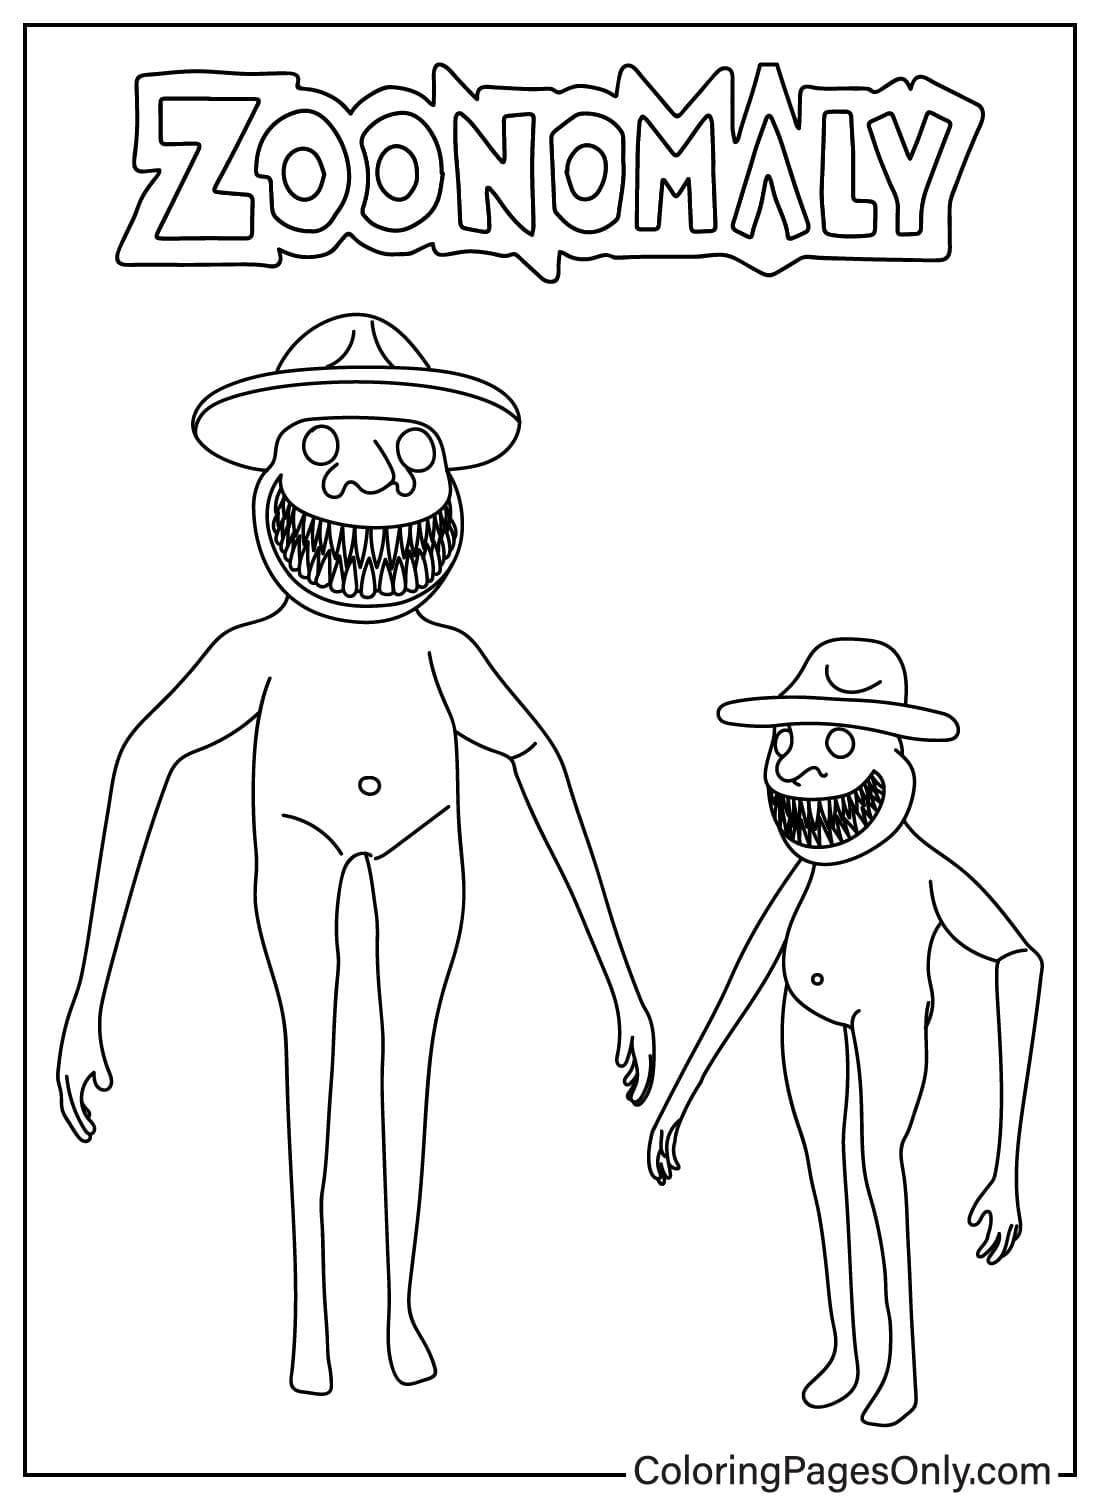 Coloring Sheet Zoonomaly from Zoonomaly